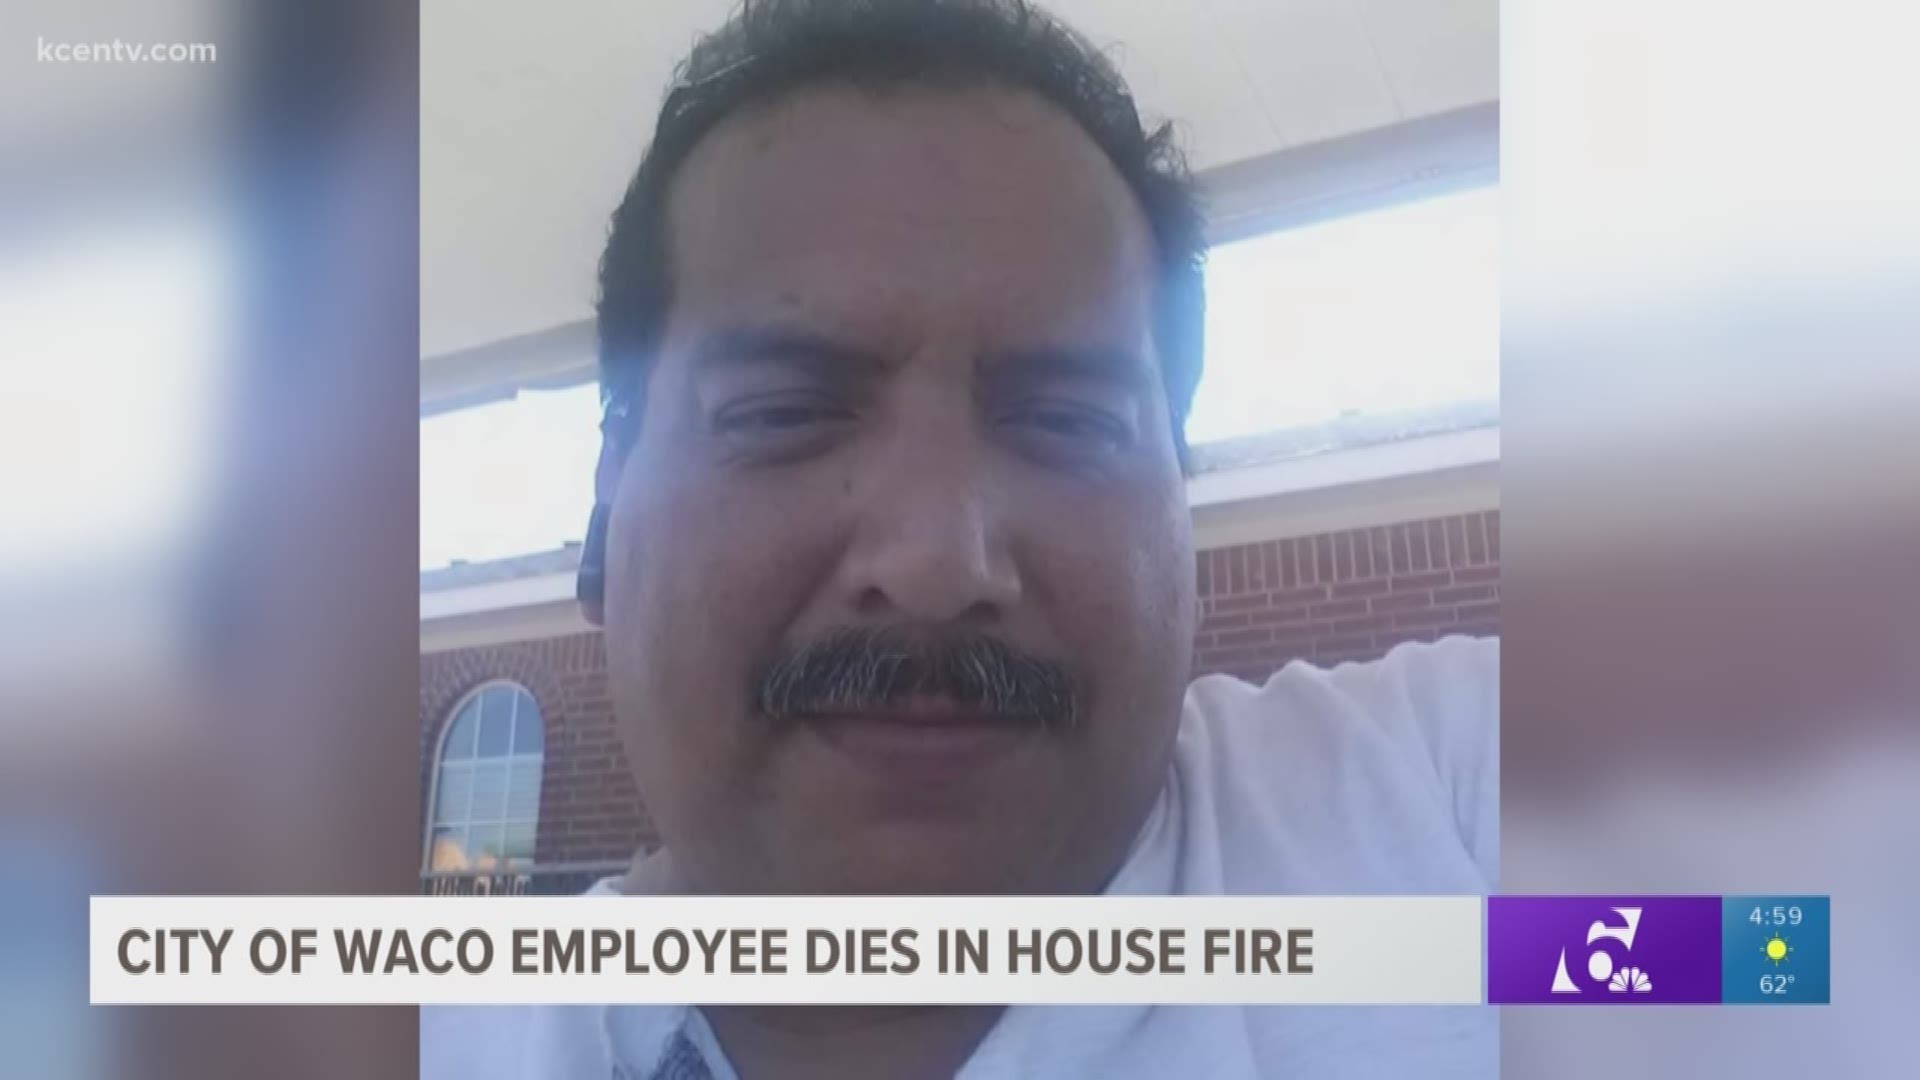 Jimmy Rios died in a fire, which happened on the 1800 block of Gormon Avenue. His mother and wife were also in the home, but made it out safely.